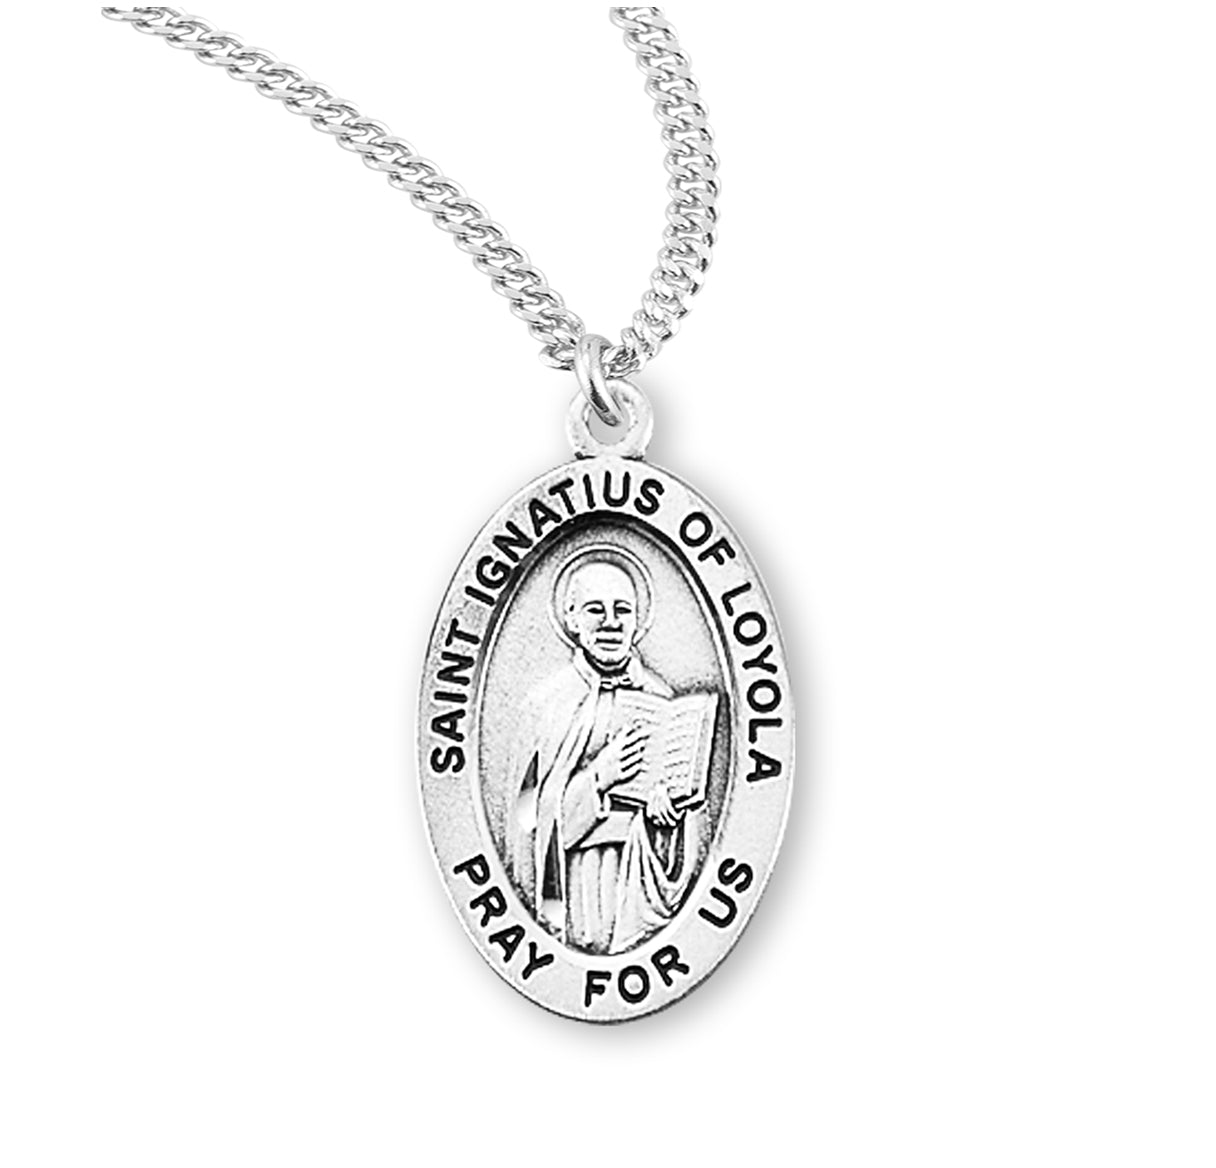 Patron Saint Ignatius of Loyola Oval Sterling Silver Medal